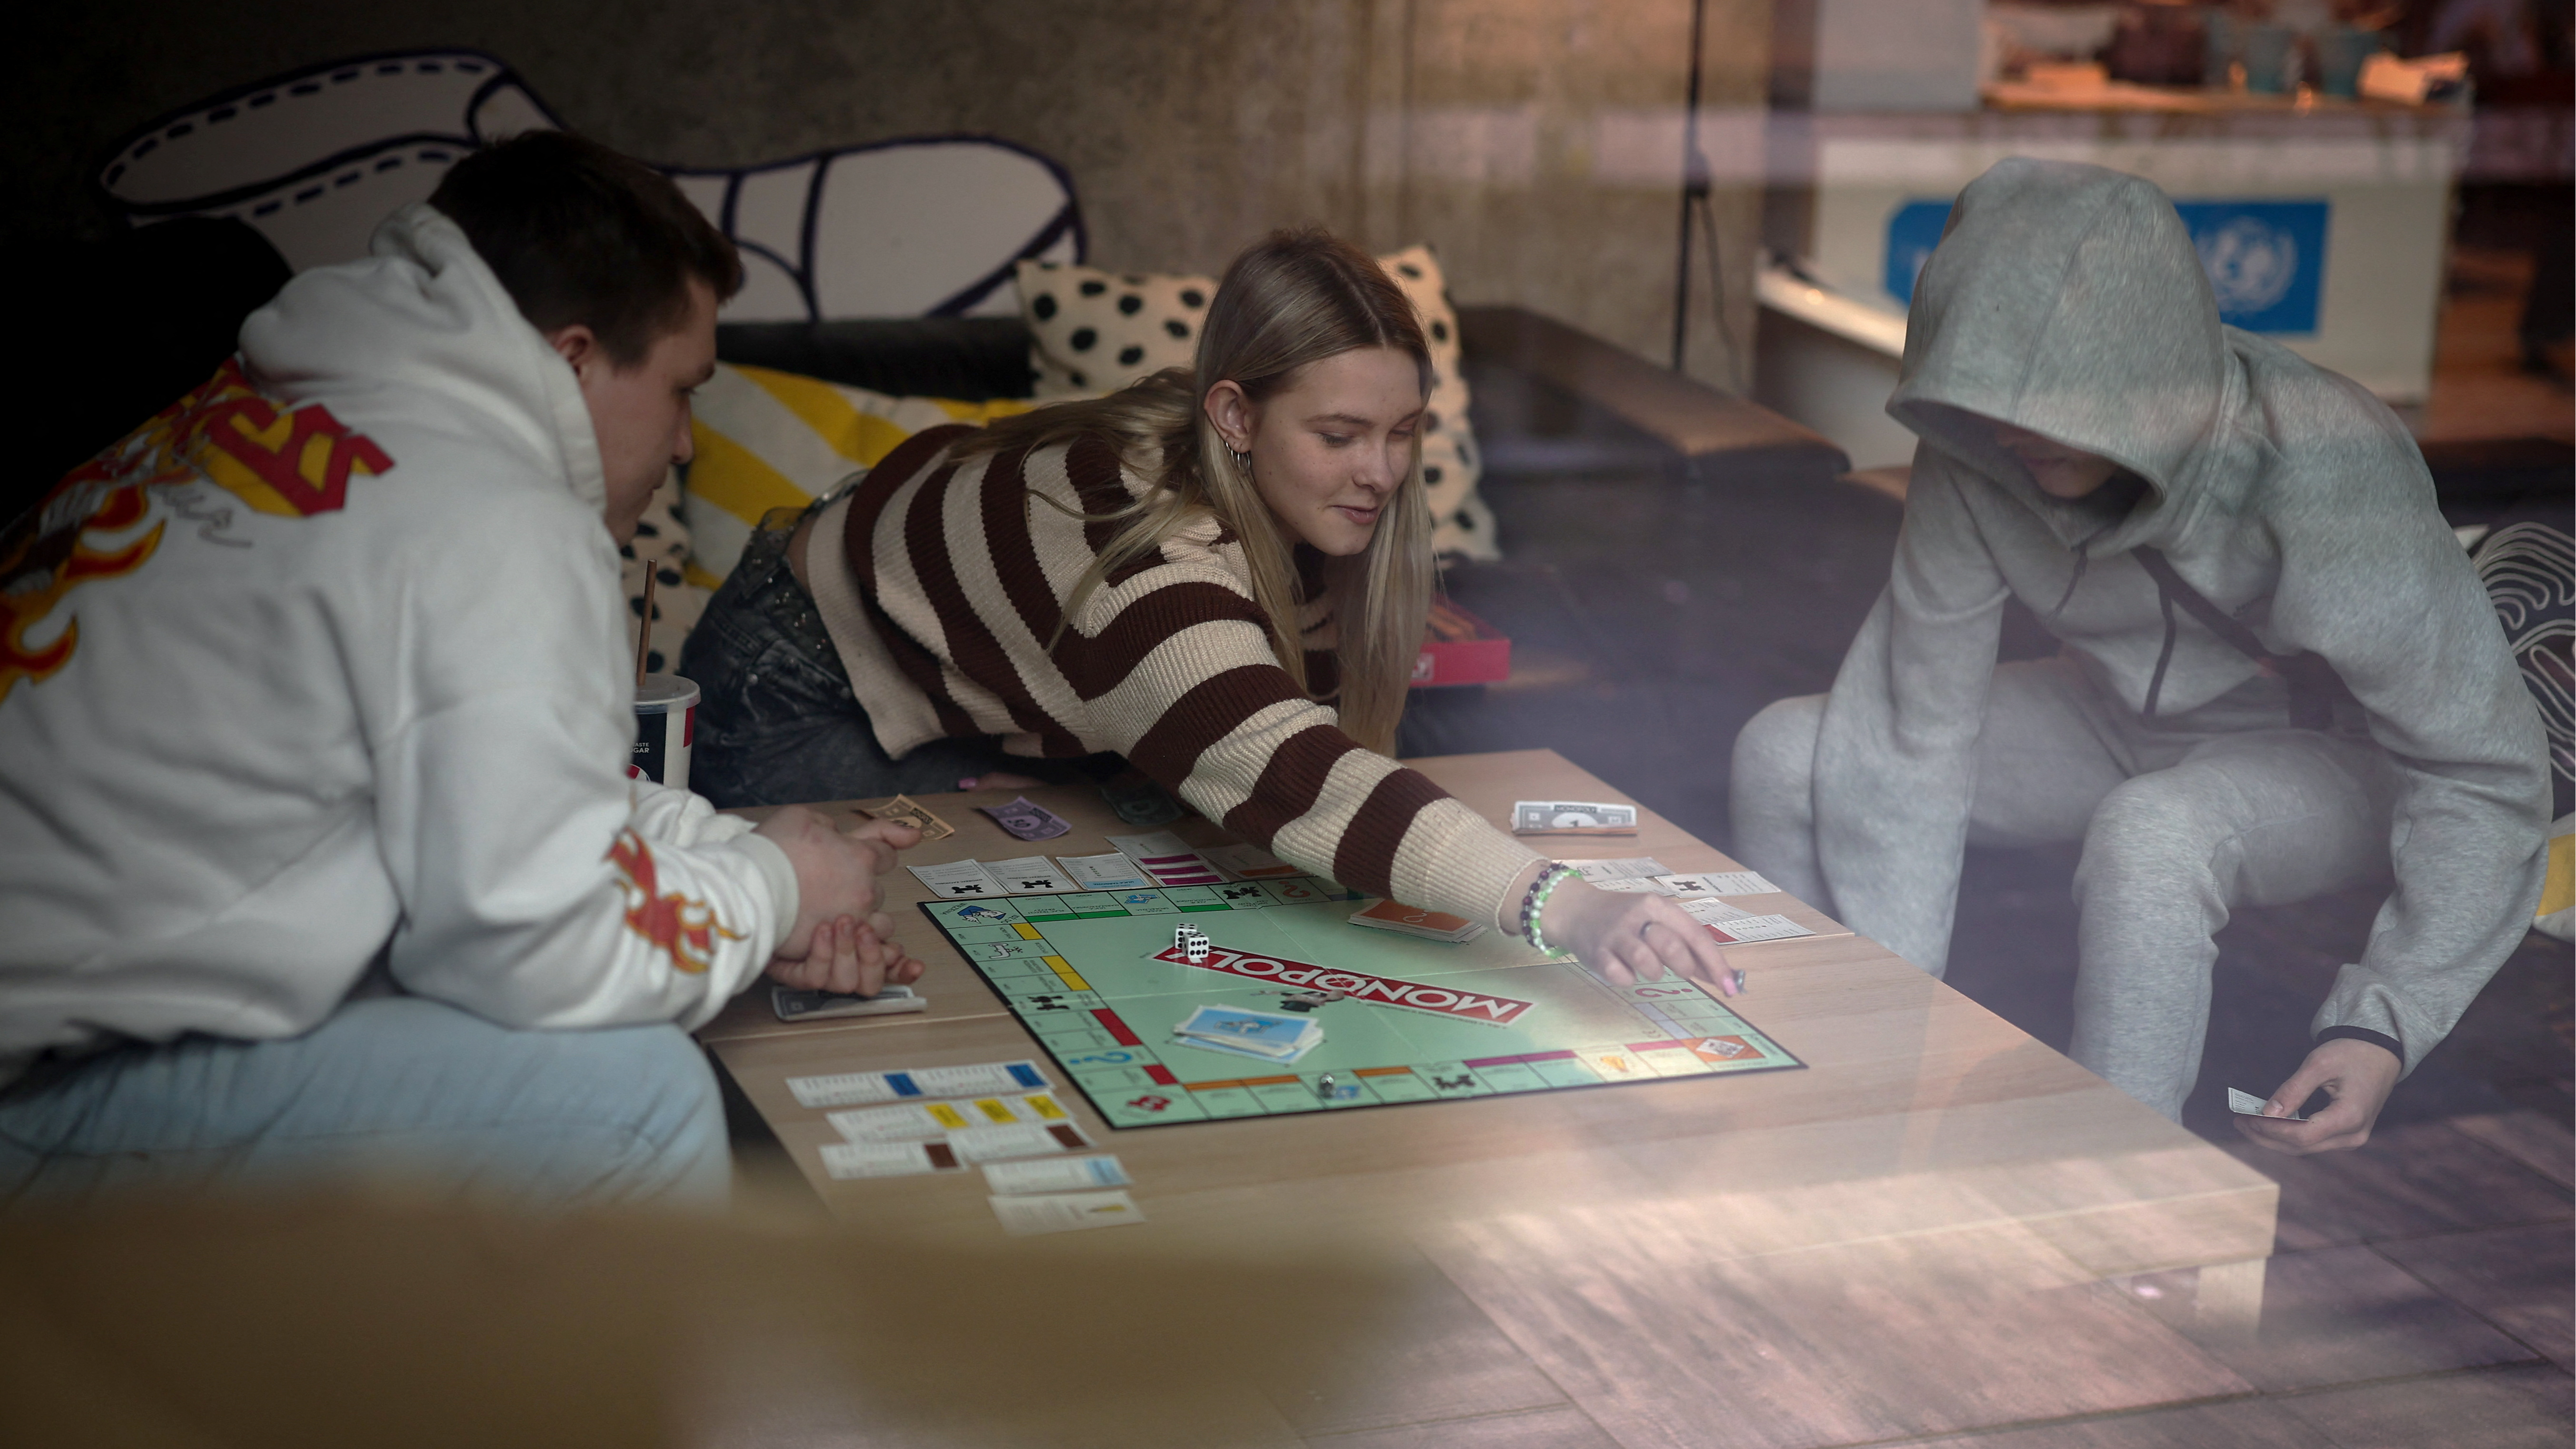 Dariia Vynohradova, 17, from Kharkiv, plays a board game with her boyfriend Dmytro Demchevskyi, 18, from Yuzhnoukrainsk, at Blue Trainers, a community space in a shopping mall in Gdansk, Poland. /Kacper Pempel/Reuters